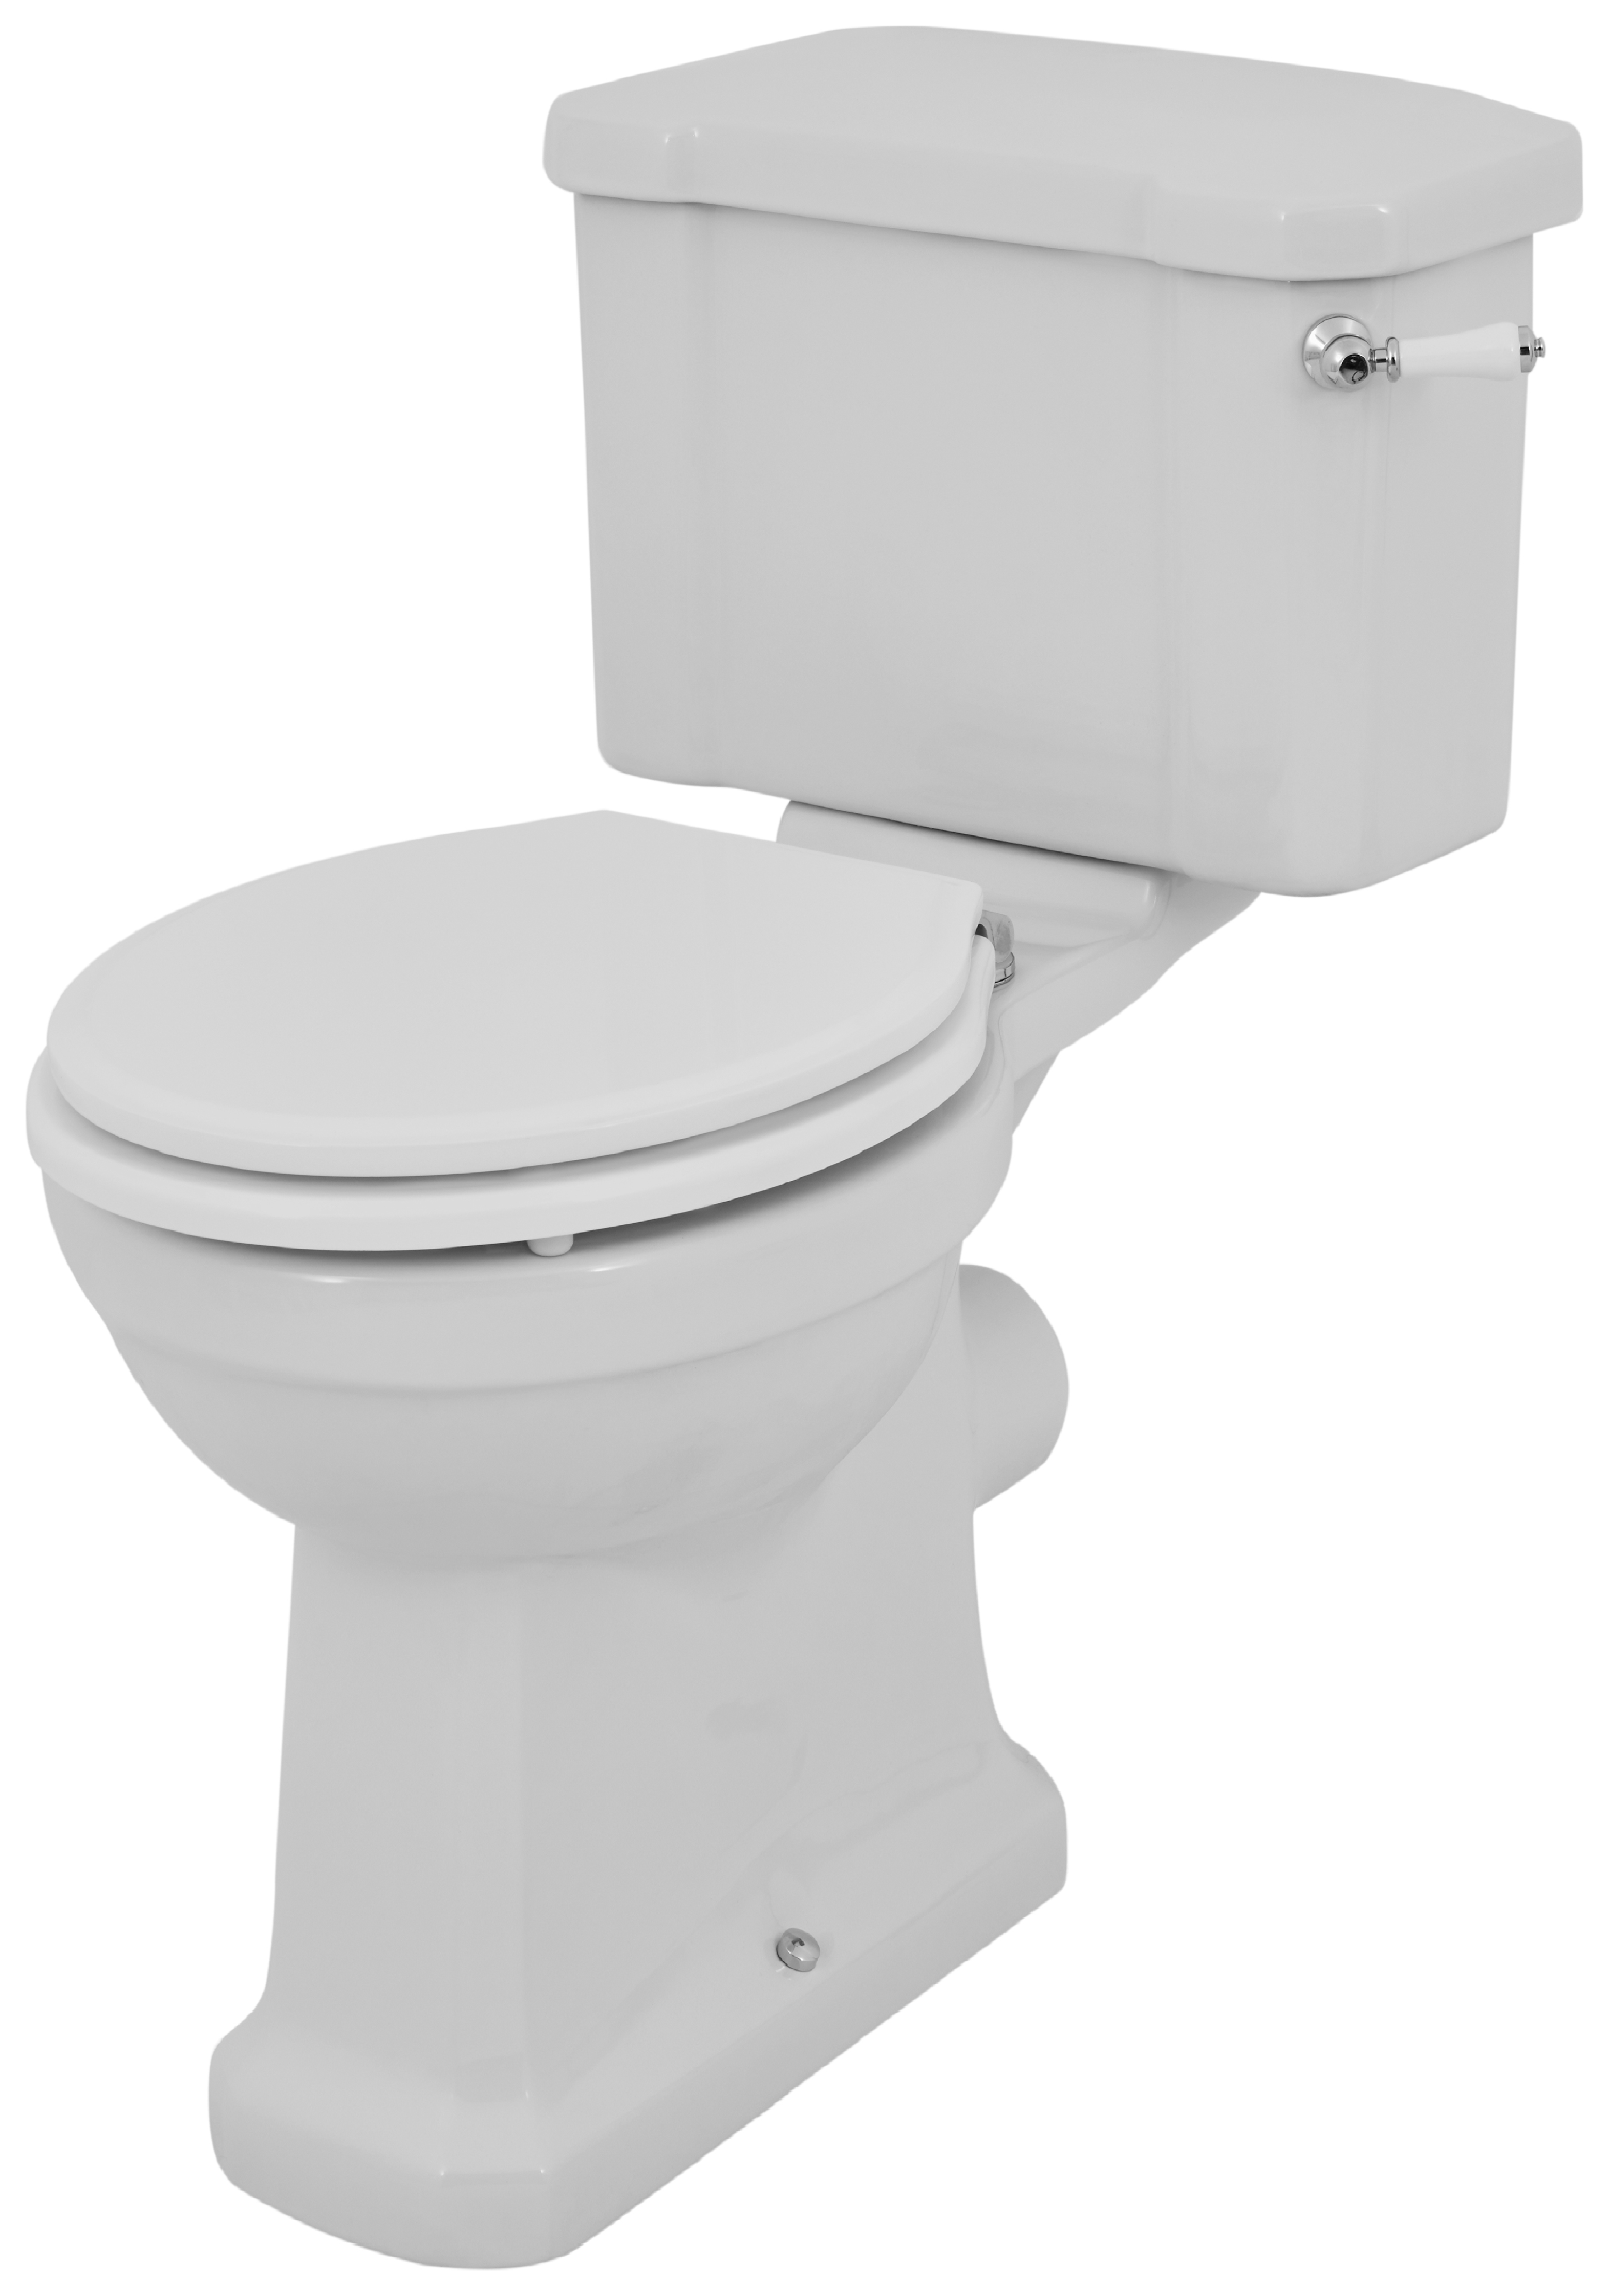 Wickes Oxford Traditional Close Coupled Comfort Height Toilet Pan, Cistern & White Soft Close Seat